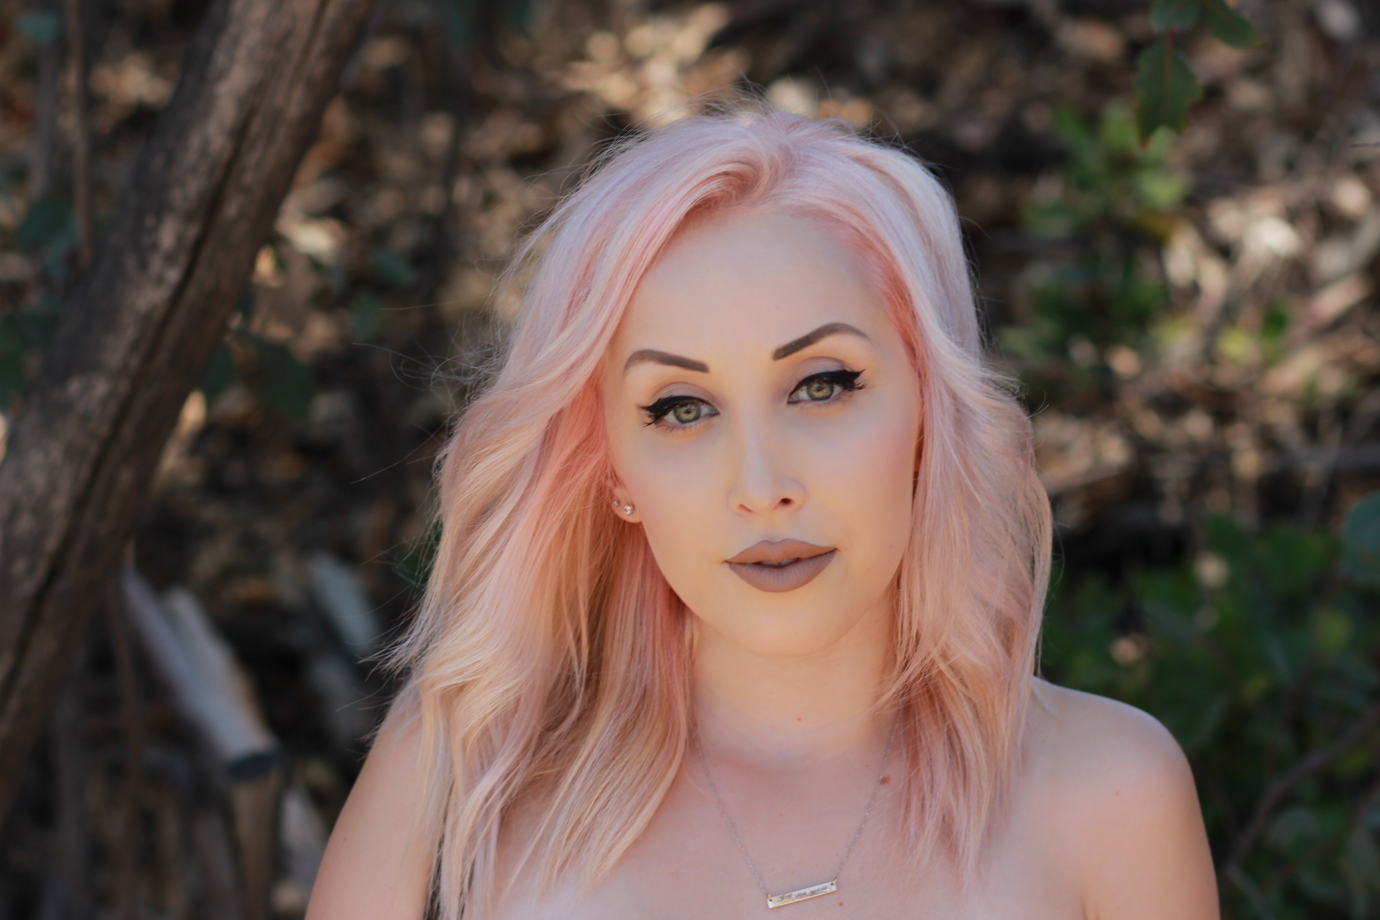 Blondie in the City | My experience getting my eyebrows microbladed | Pastel pink hair | Semi-Permanent Eyebrows